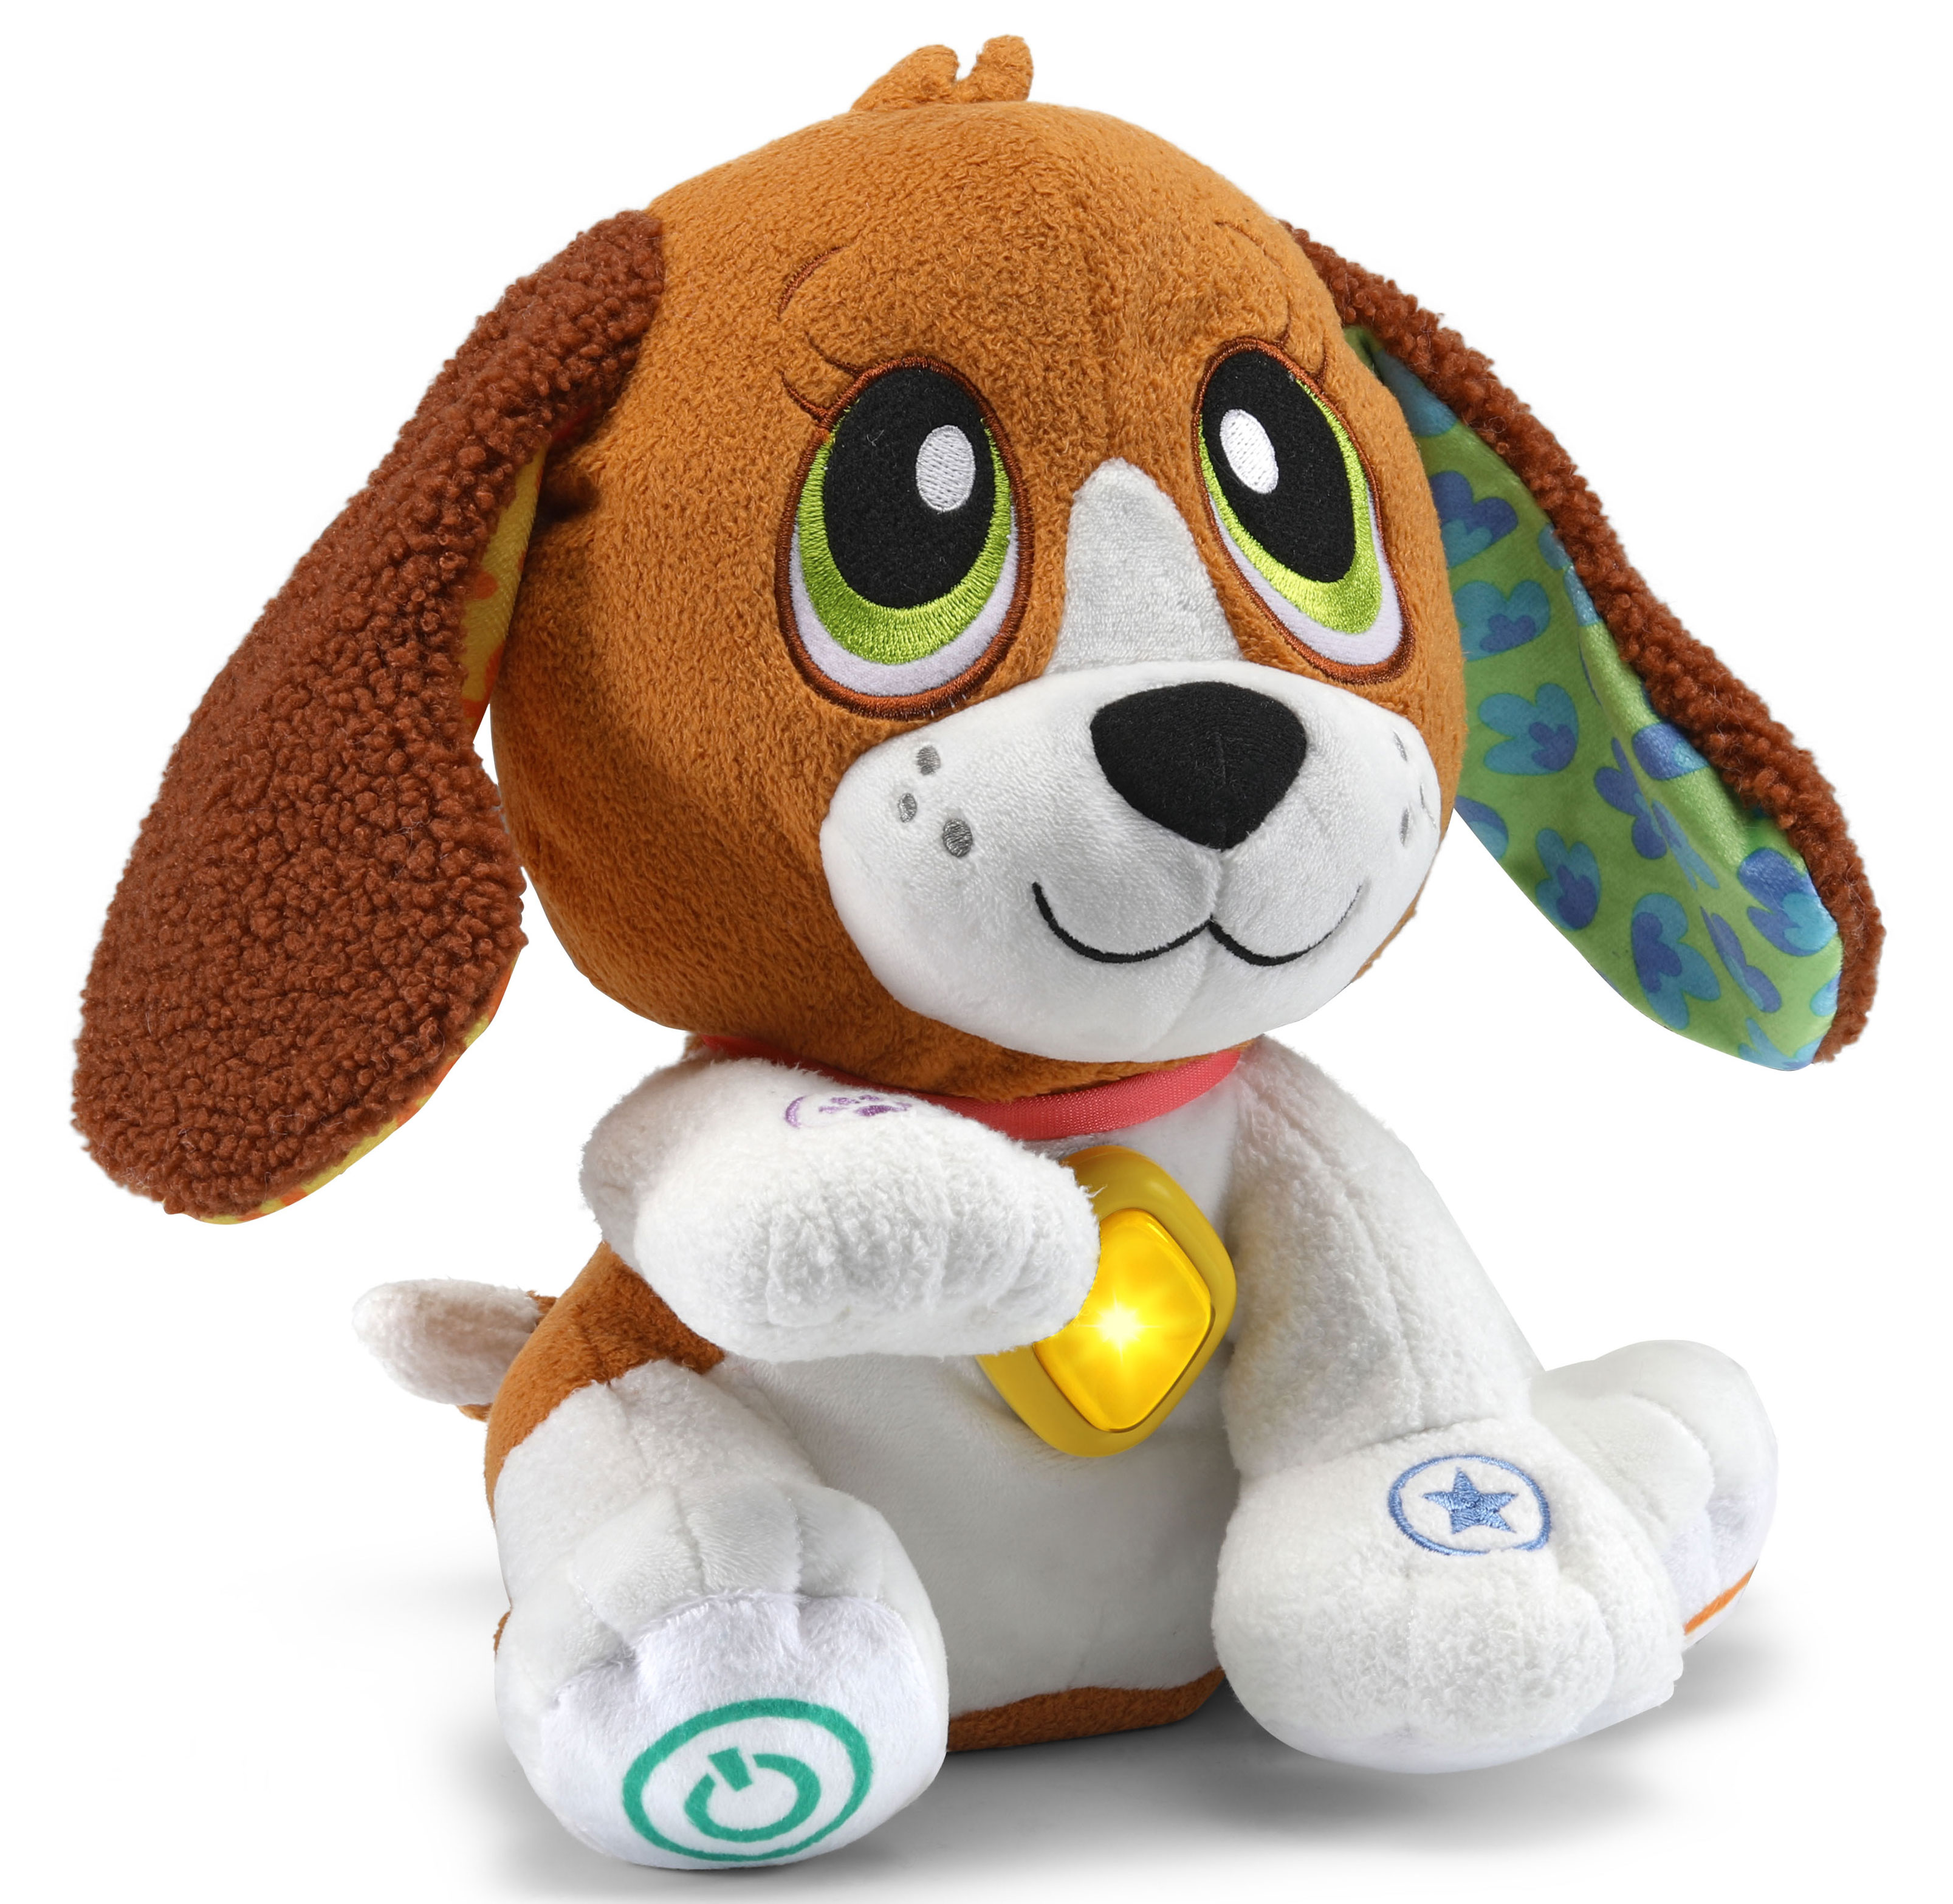 TFNY: VTech, Leapfrog Expand Baby, Toddler Toy Lines - The Toy Book